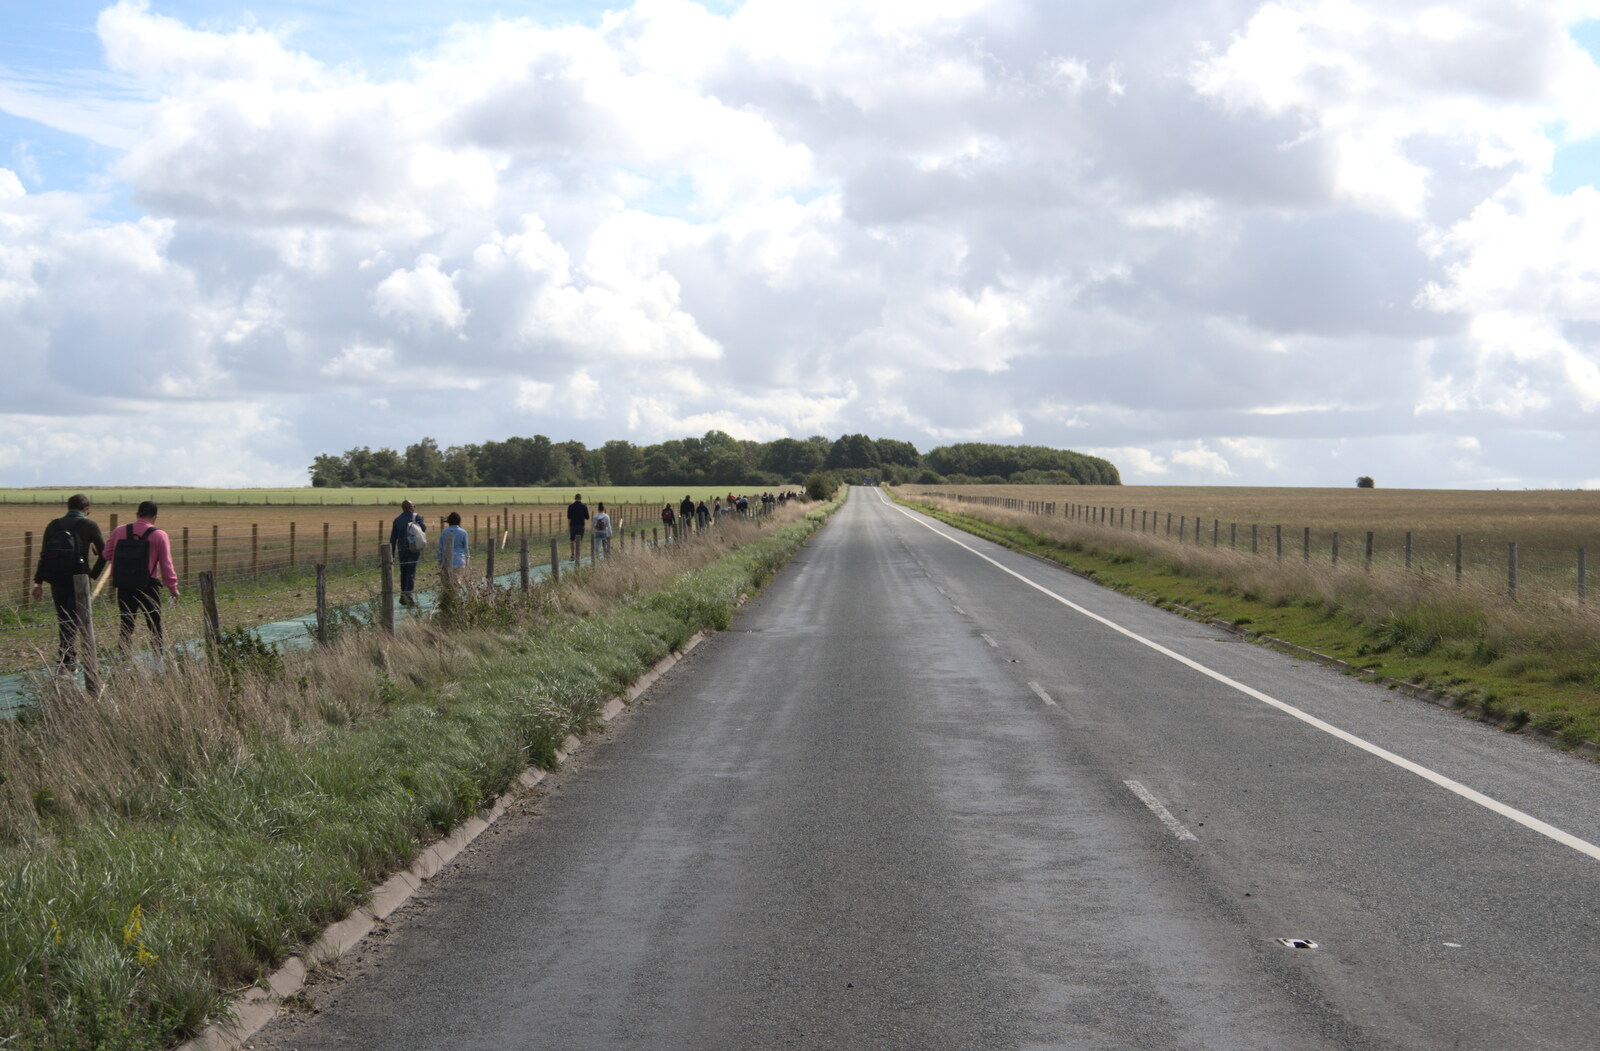 The road up to Stonehenge from Stone Circles: Stonehenge and Avebury, Wiltshire - 22nd August 2020